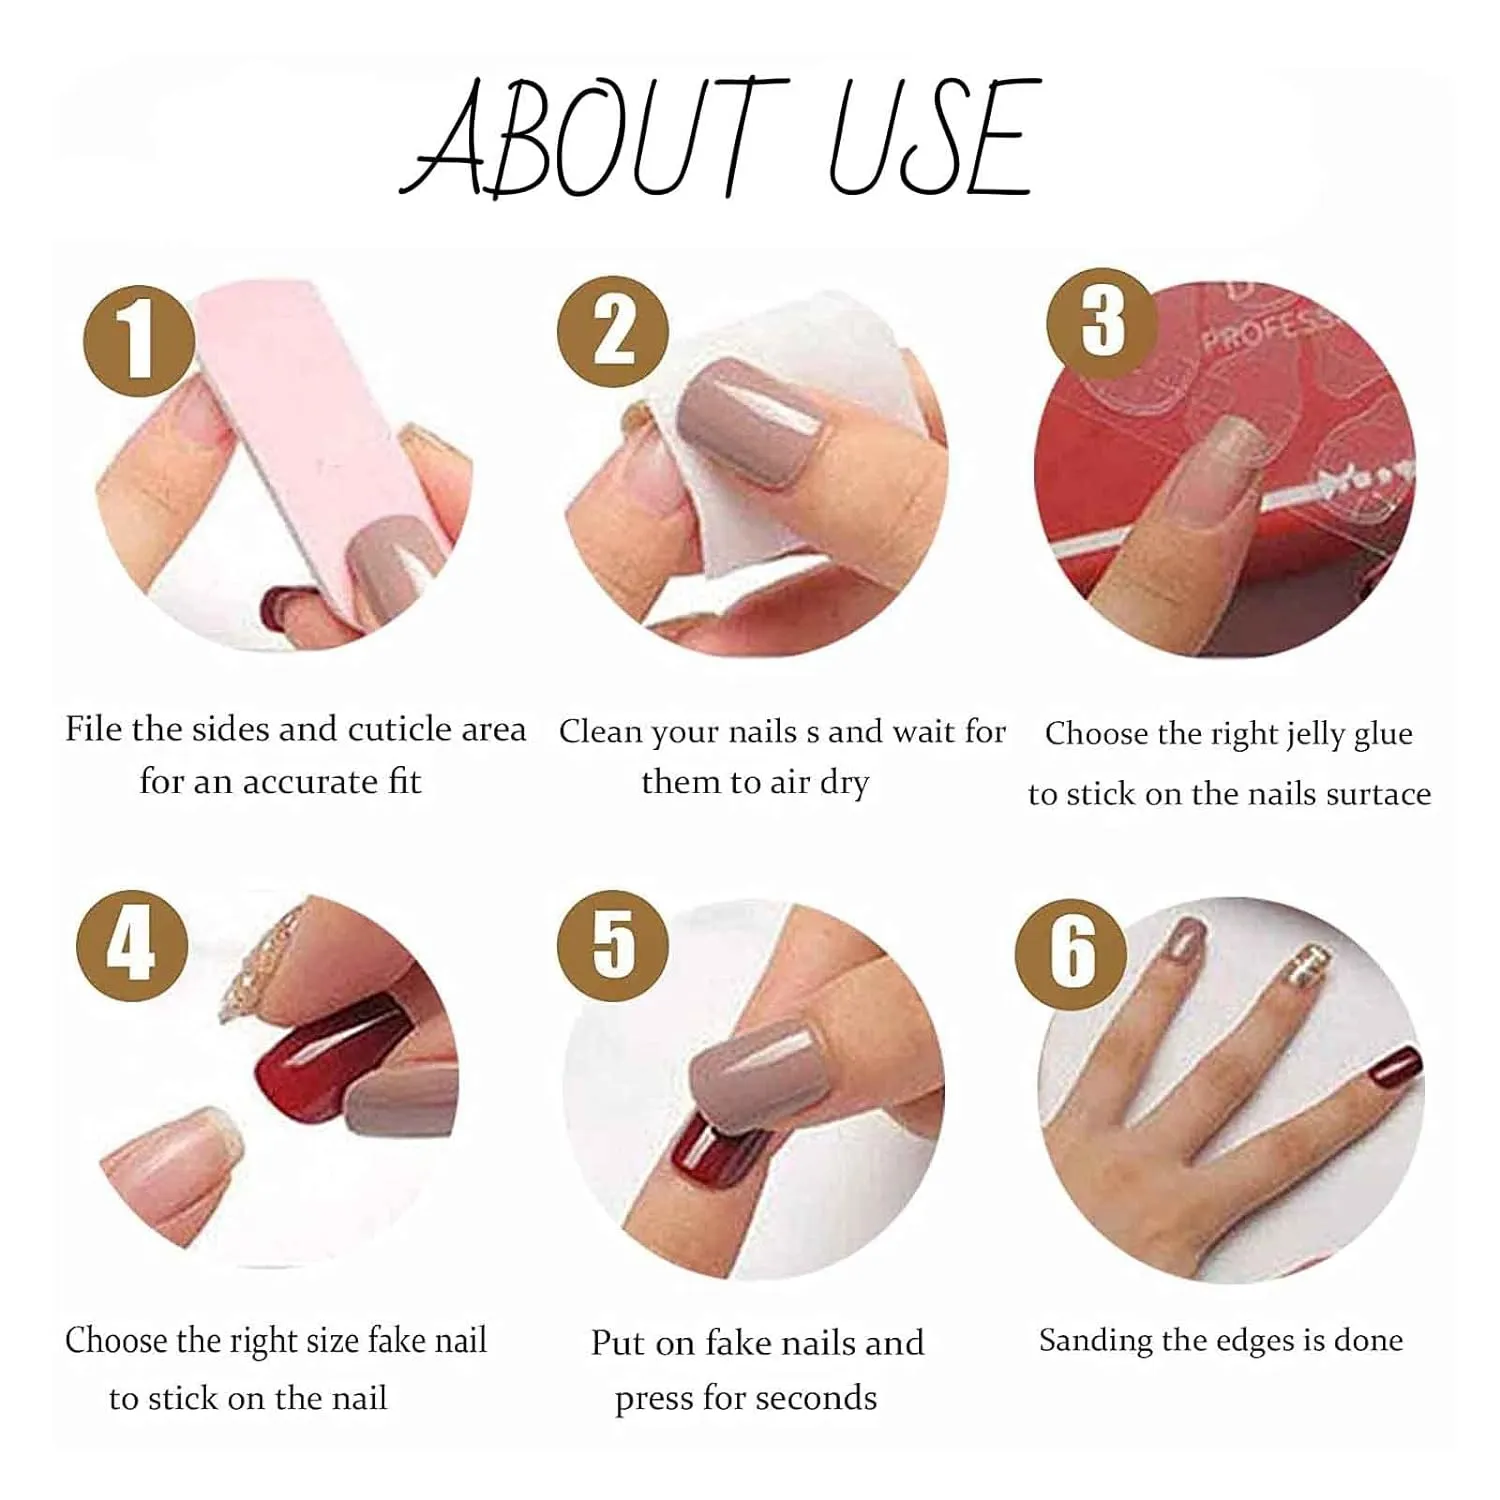 Pure manual light therapy wear nail light dei micro makeup wear nail wholesale product reusable nail patch removable